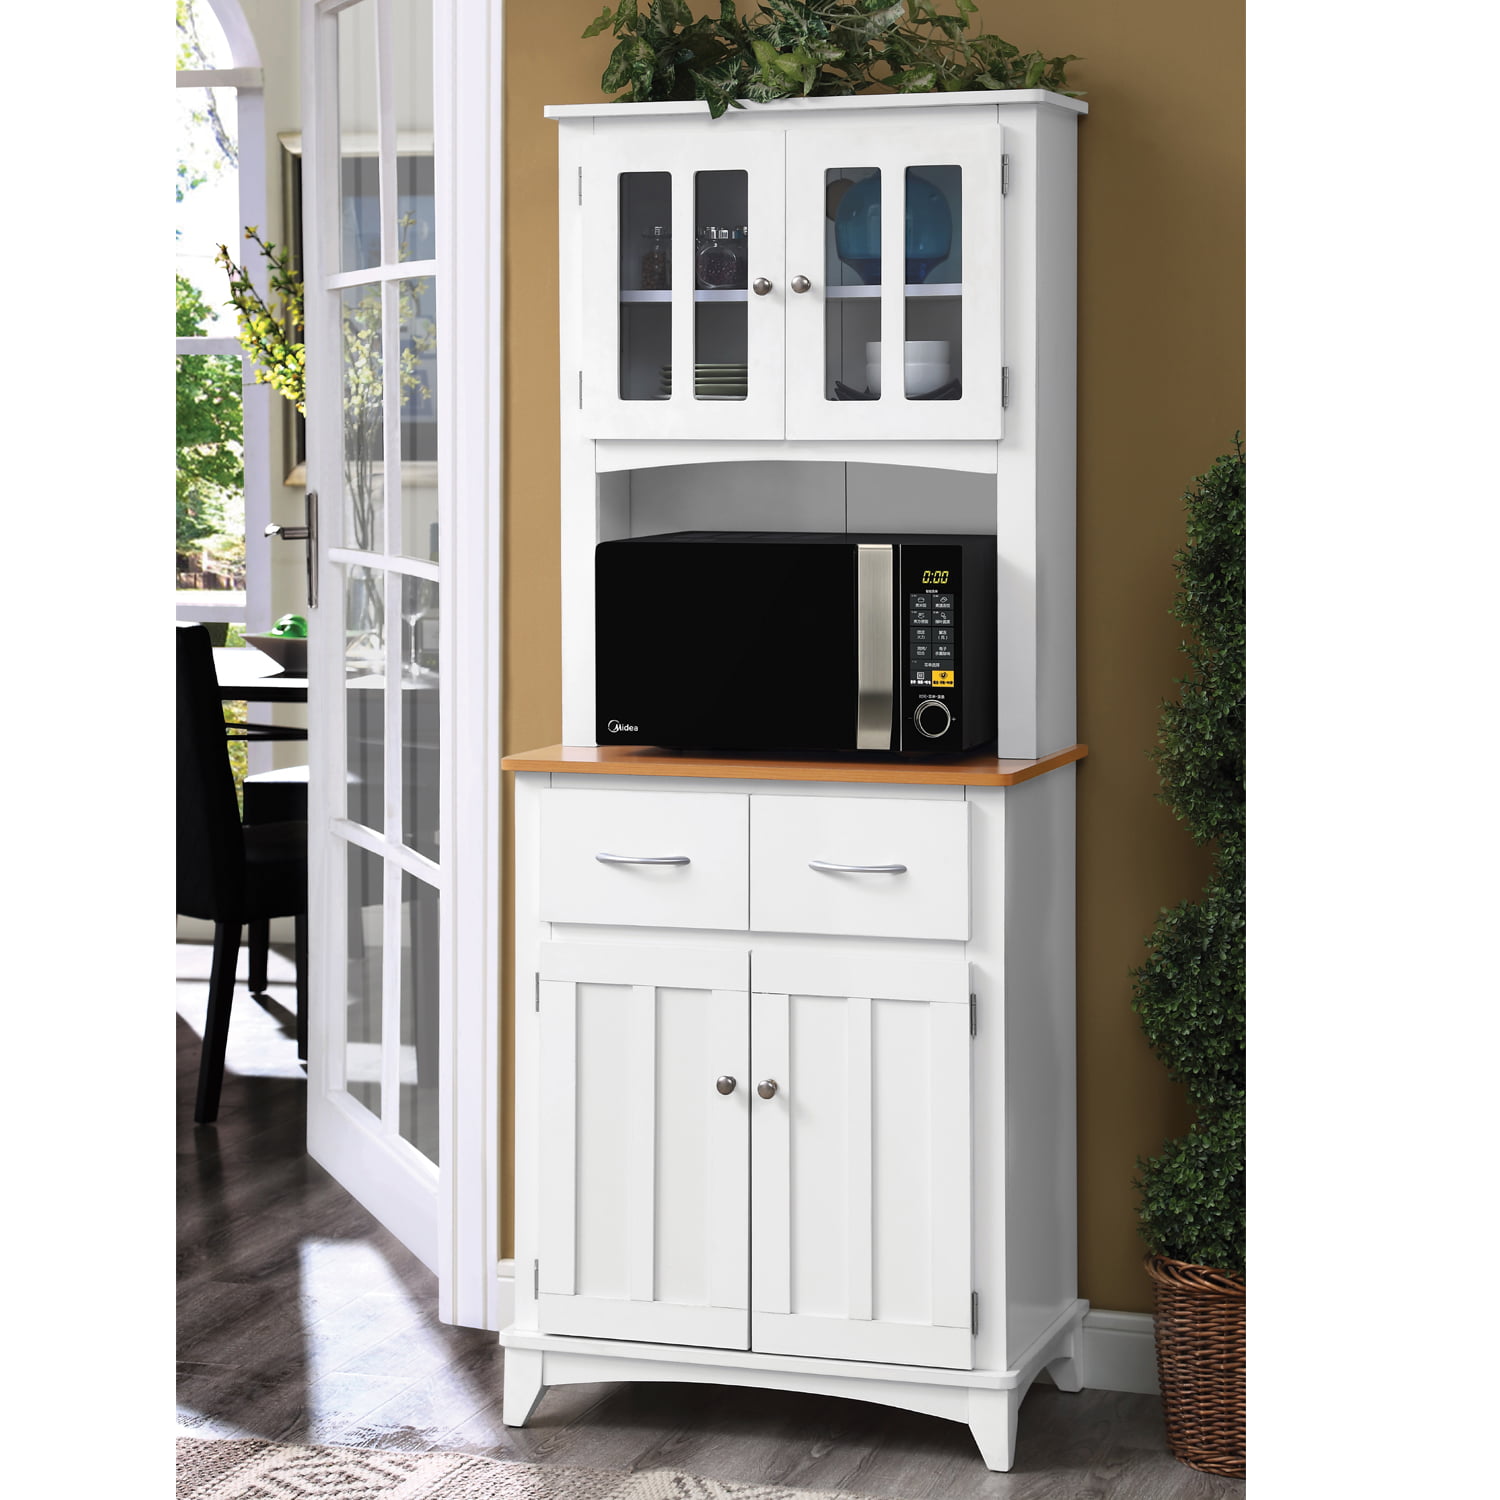 Large Microwave Cart End Kitchen Cabinet Countertop Shelf Tall Pantry